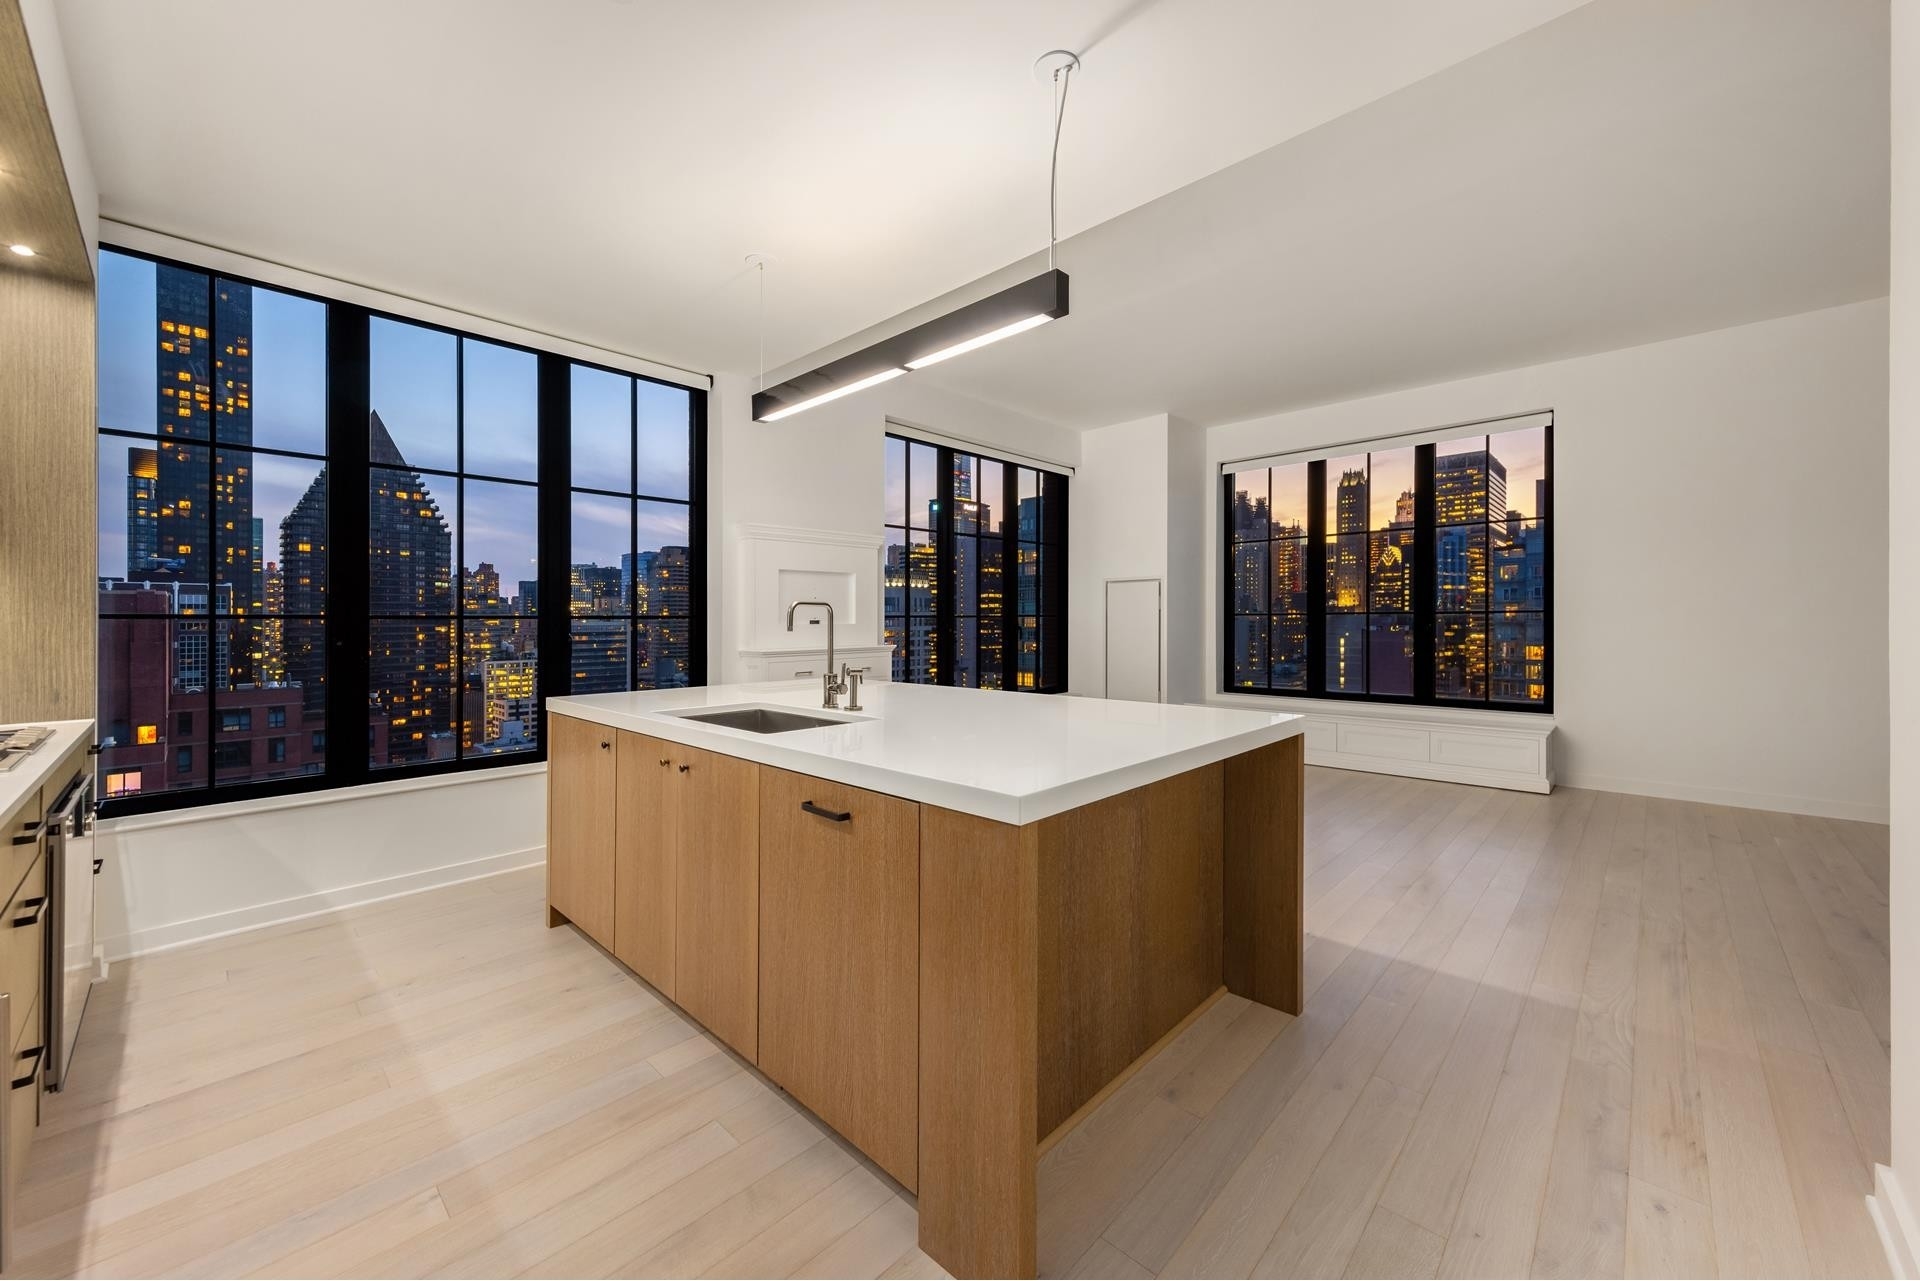 1. Condominiums for Sale at The Sutton, 959 FIRST AVE, 25A Turtle Bay, New York, NY 10022